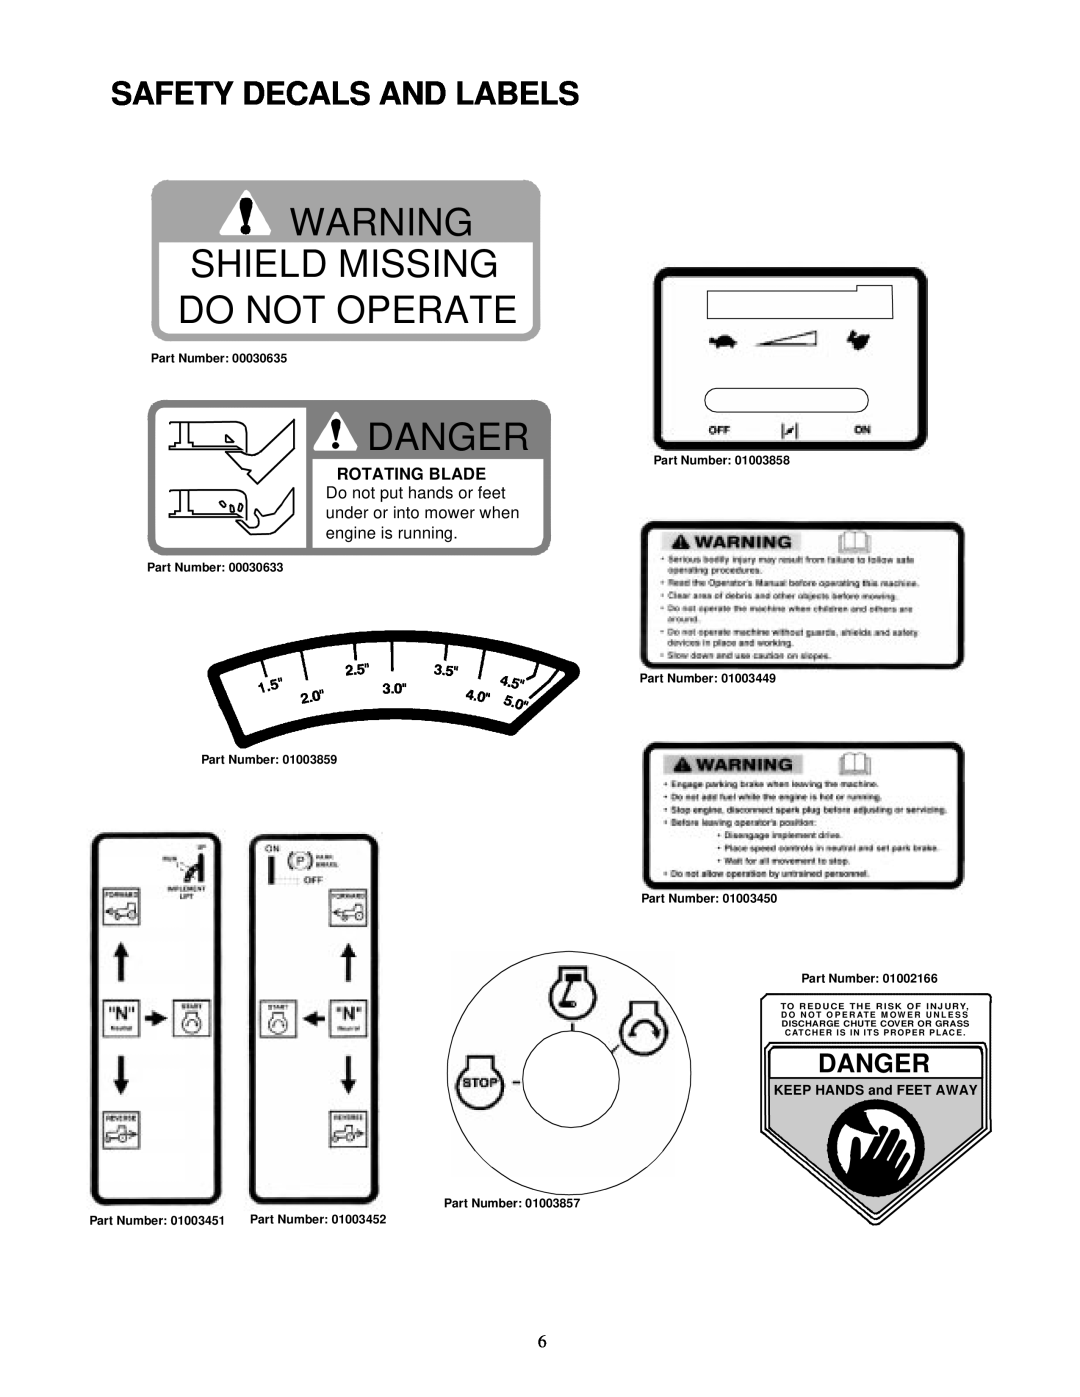 Cub Cadet 18HP Safety Decals And Labels, Shield Missing Do Not Operate, Danger, KEEP HANDS and FEET AWAY, Part Number 